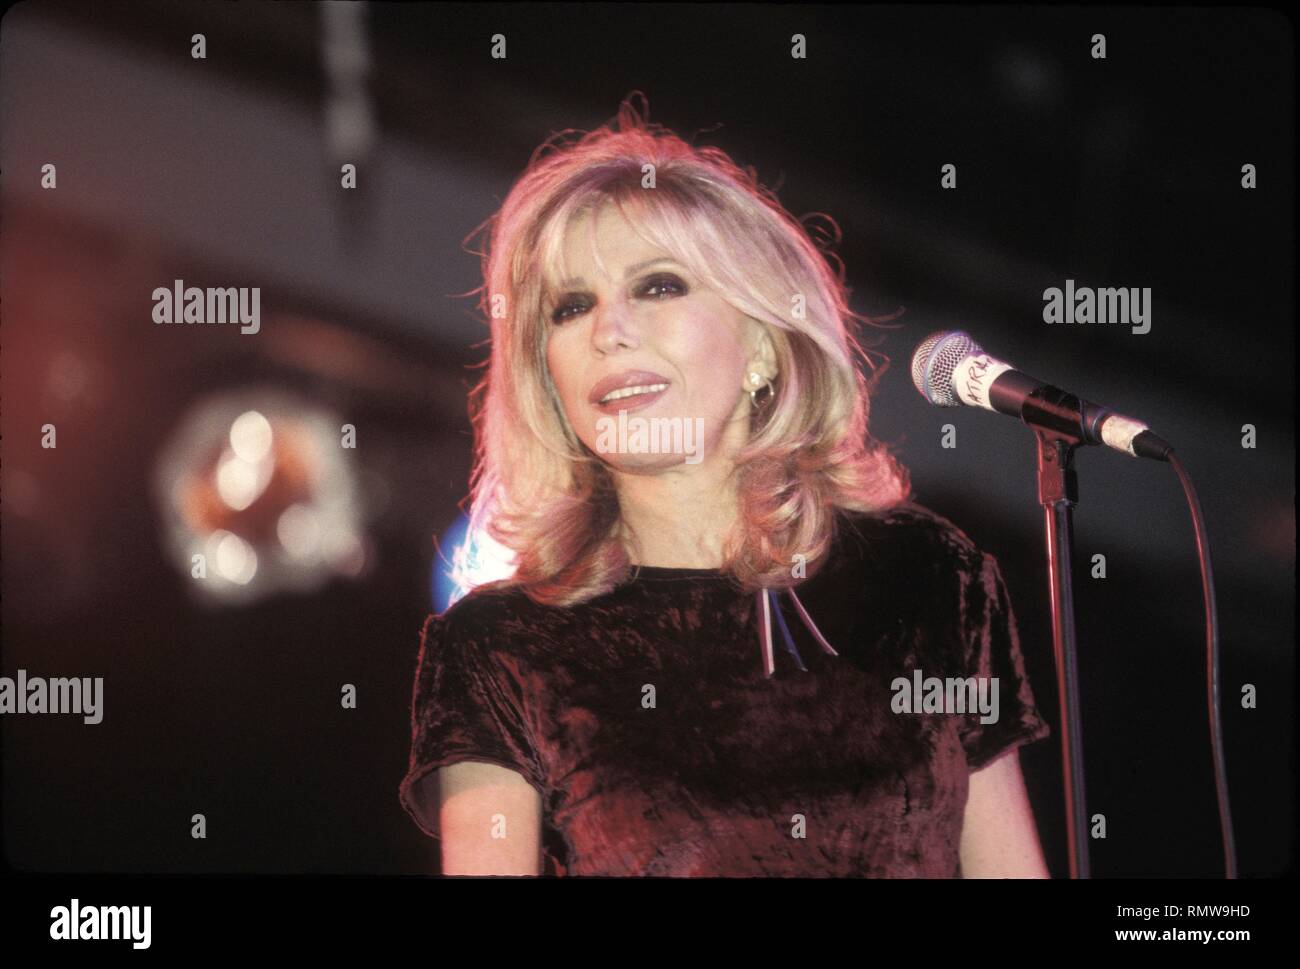 Singer and actress Nancy Sinatra, the daughter of singer & actor Frank Sinatra, is shown performing on stage during a 'live' concert appearance. Stock Photo